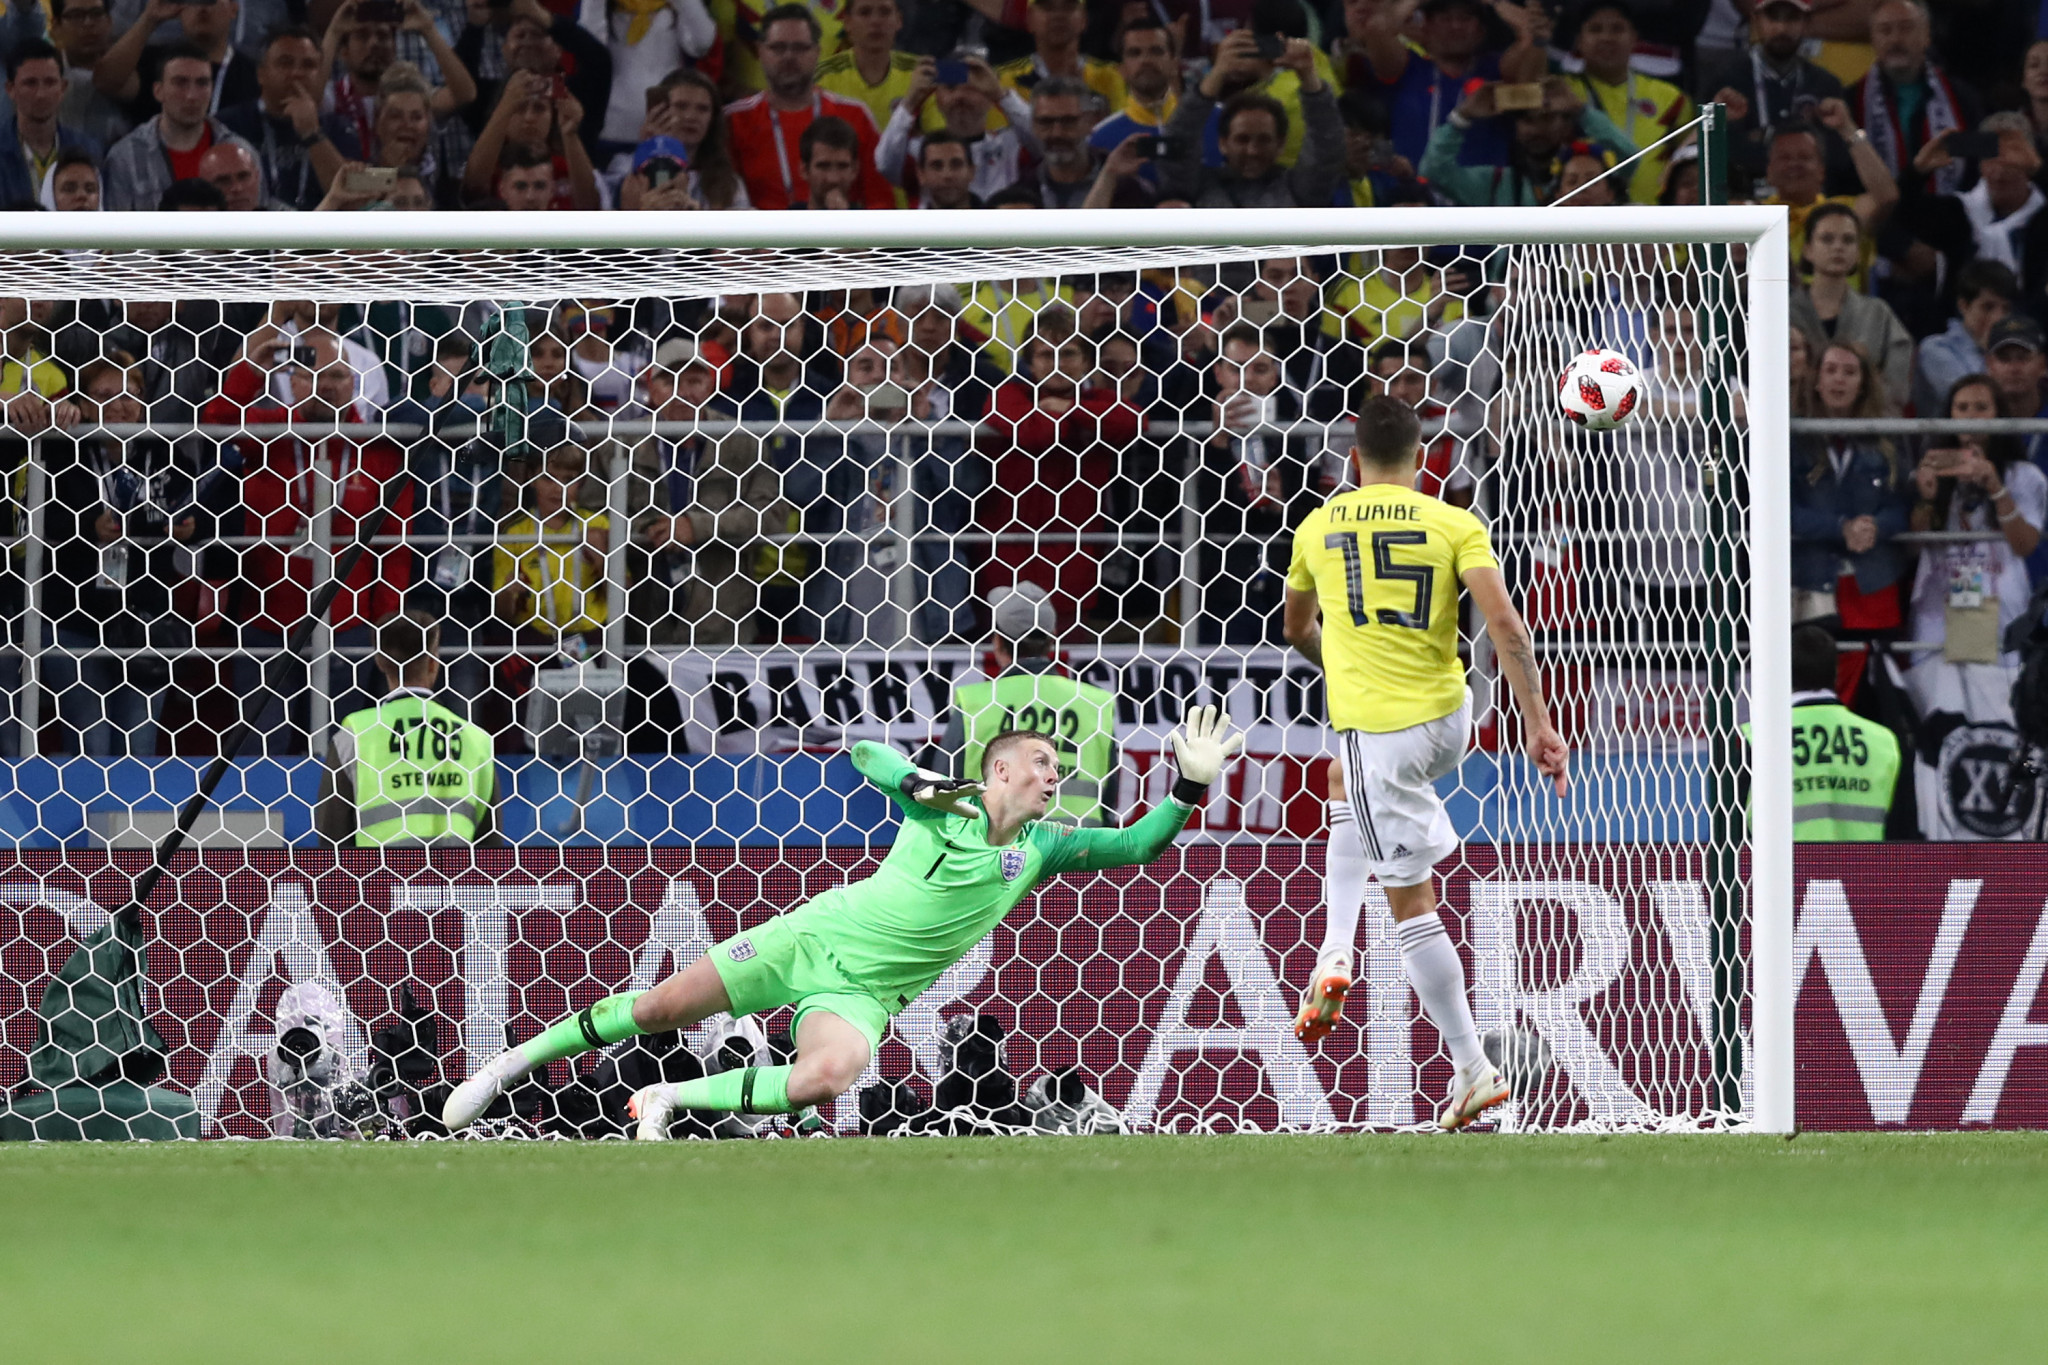 Mateus Uribe hit the bar with Colombia's fourth penalty after Jordan Henderson saw his effort saved ©Getty Images